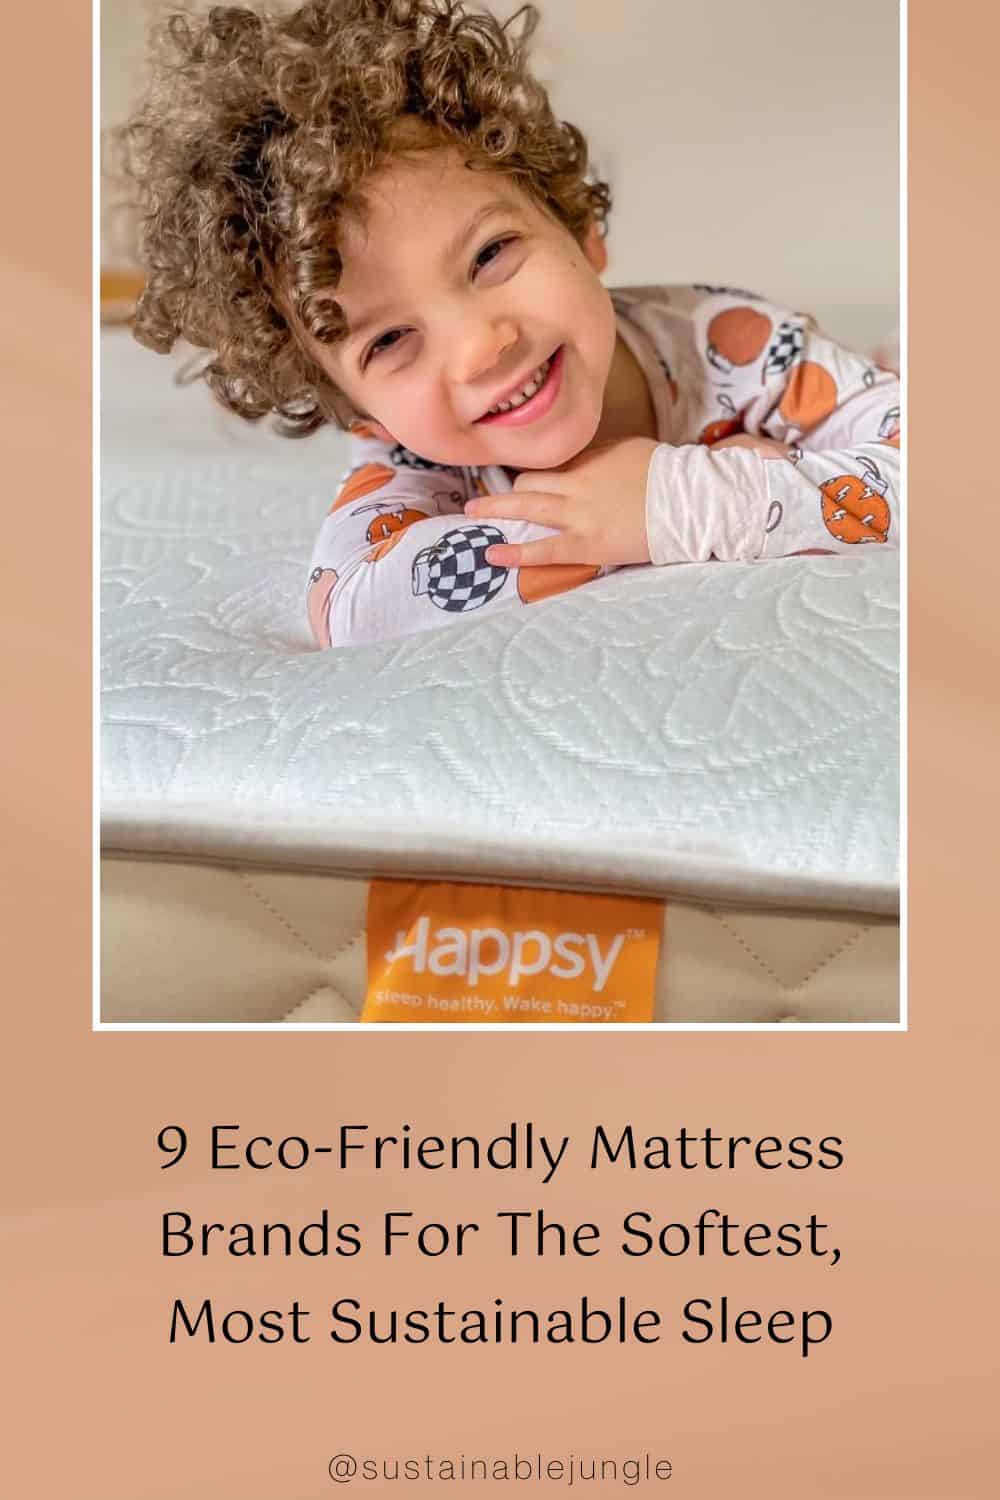 9 Eco-Friendly Mattress Brands For The Softest, Most Sustainable Sleep Image by Happsy #ecofriendlymattress #ecofriendlymattressbrands #bestecofriendlymattresses #sustainablemattressbrands #sustainablemattresses #ecofriendlyfoammattress #sustainablejungle